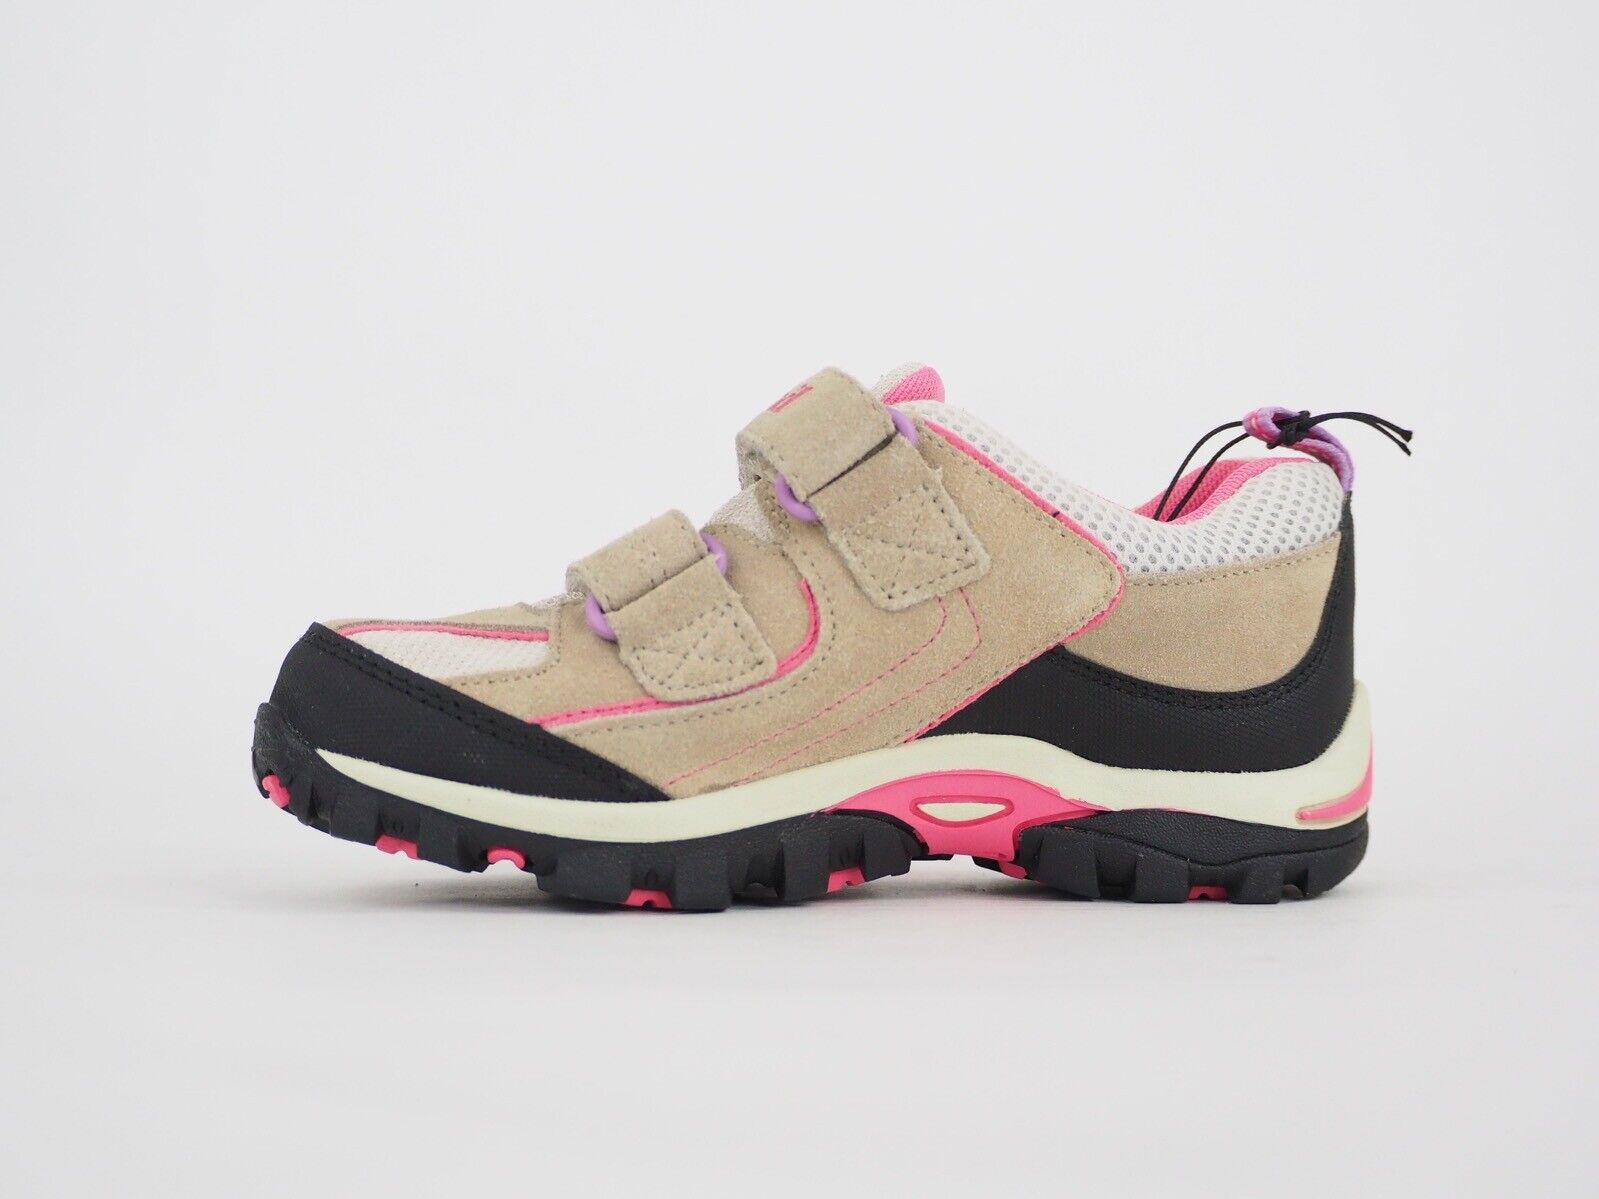 Girls Timberland GoreTex 7479R Pink / Beige Leather 2 Strap Walking Hiking Shoes - London Top Style